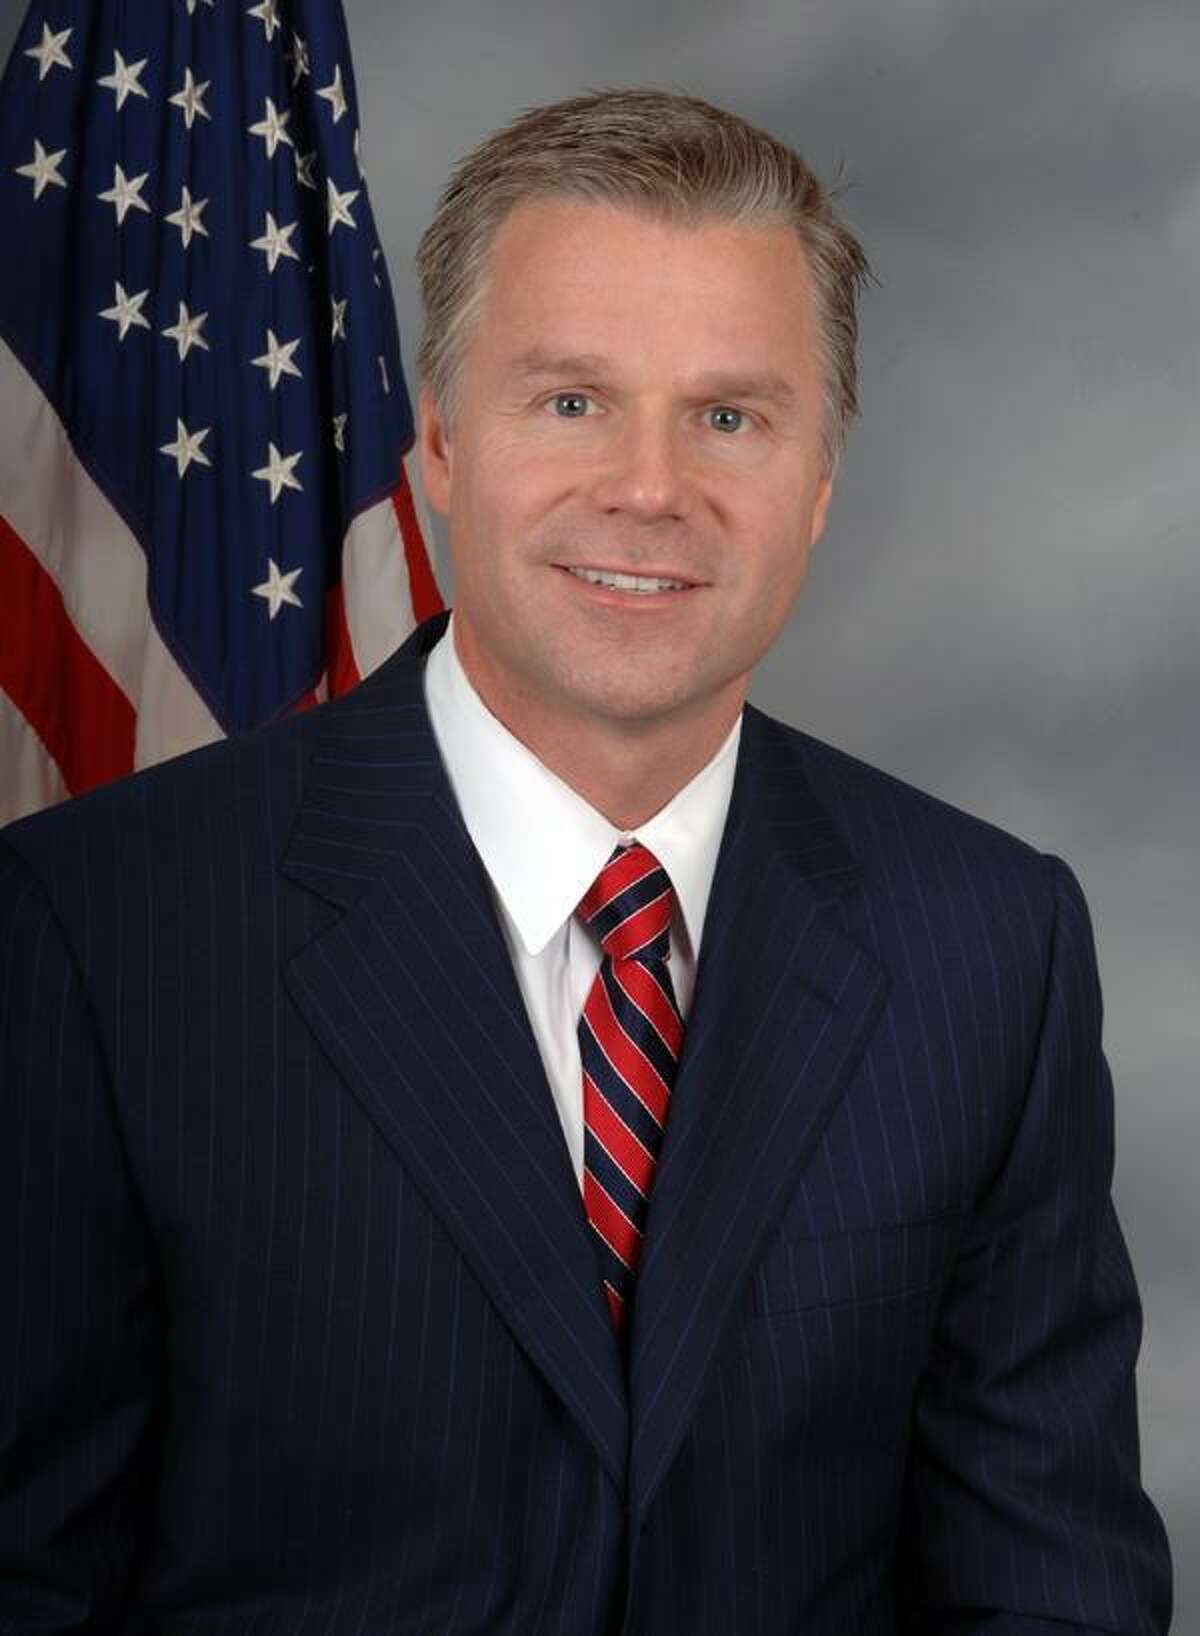 In this image provided by the U.S. House of Representatives, Rep. Christopher Lee, R-N.Y., is seen in Washington. Lee is abruptly resigning his seat, saying he regrets actions that have hurt his family and others after a gossip web site reported Wednesday, Feb. 9, 2011, that Lee, a married two-term Republican lawmaker, had sent a shirtless photo of himself to a woman he met on Craigslist. (AP Photo/House of Representatives)